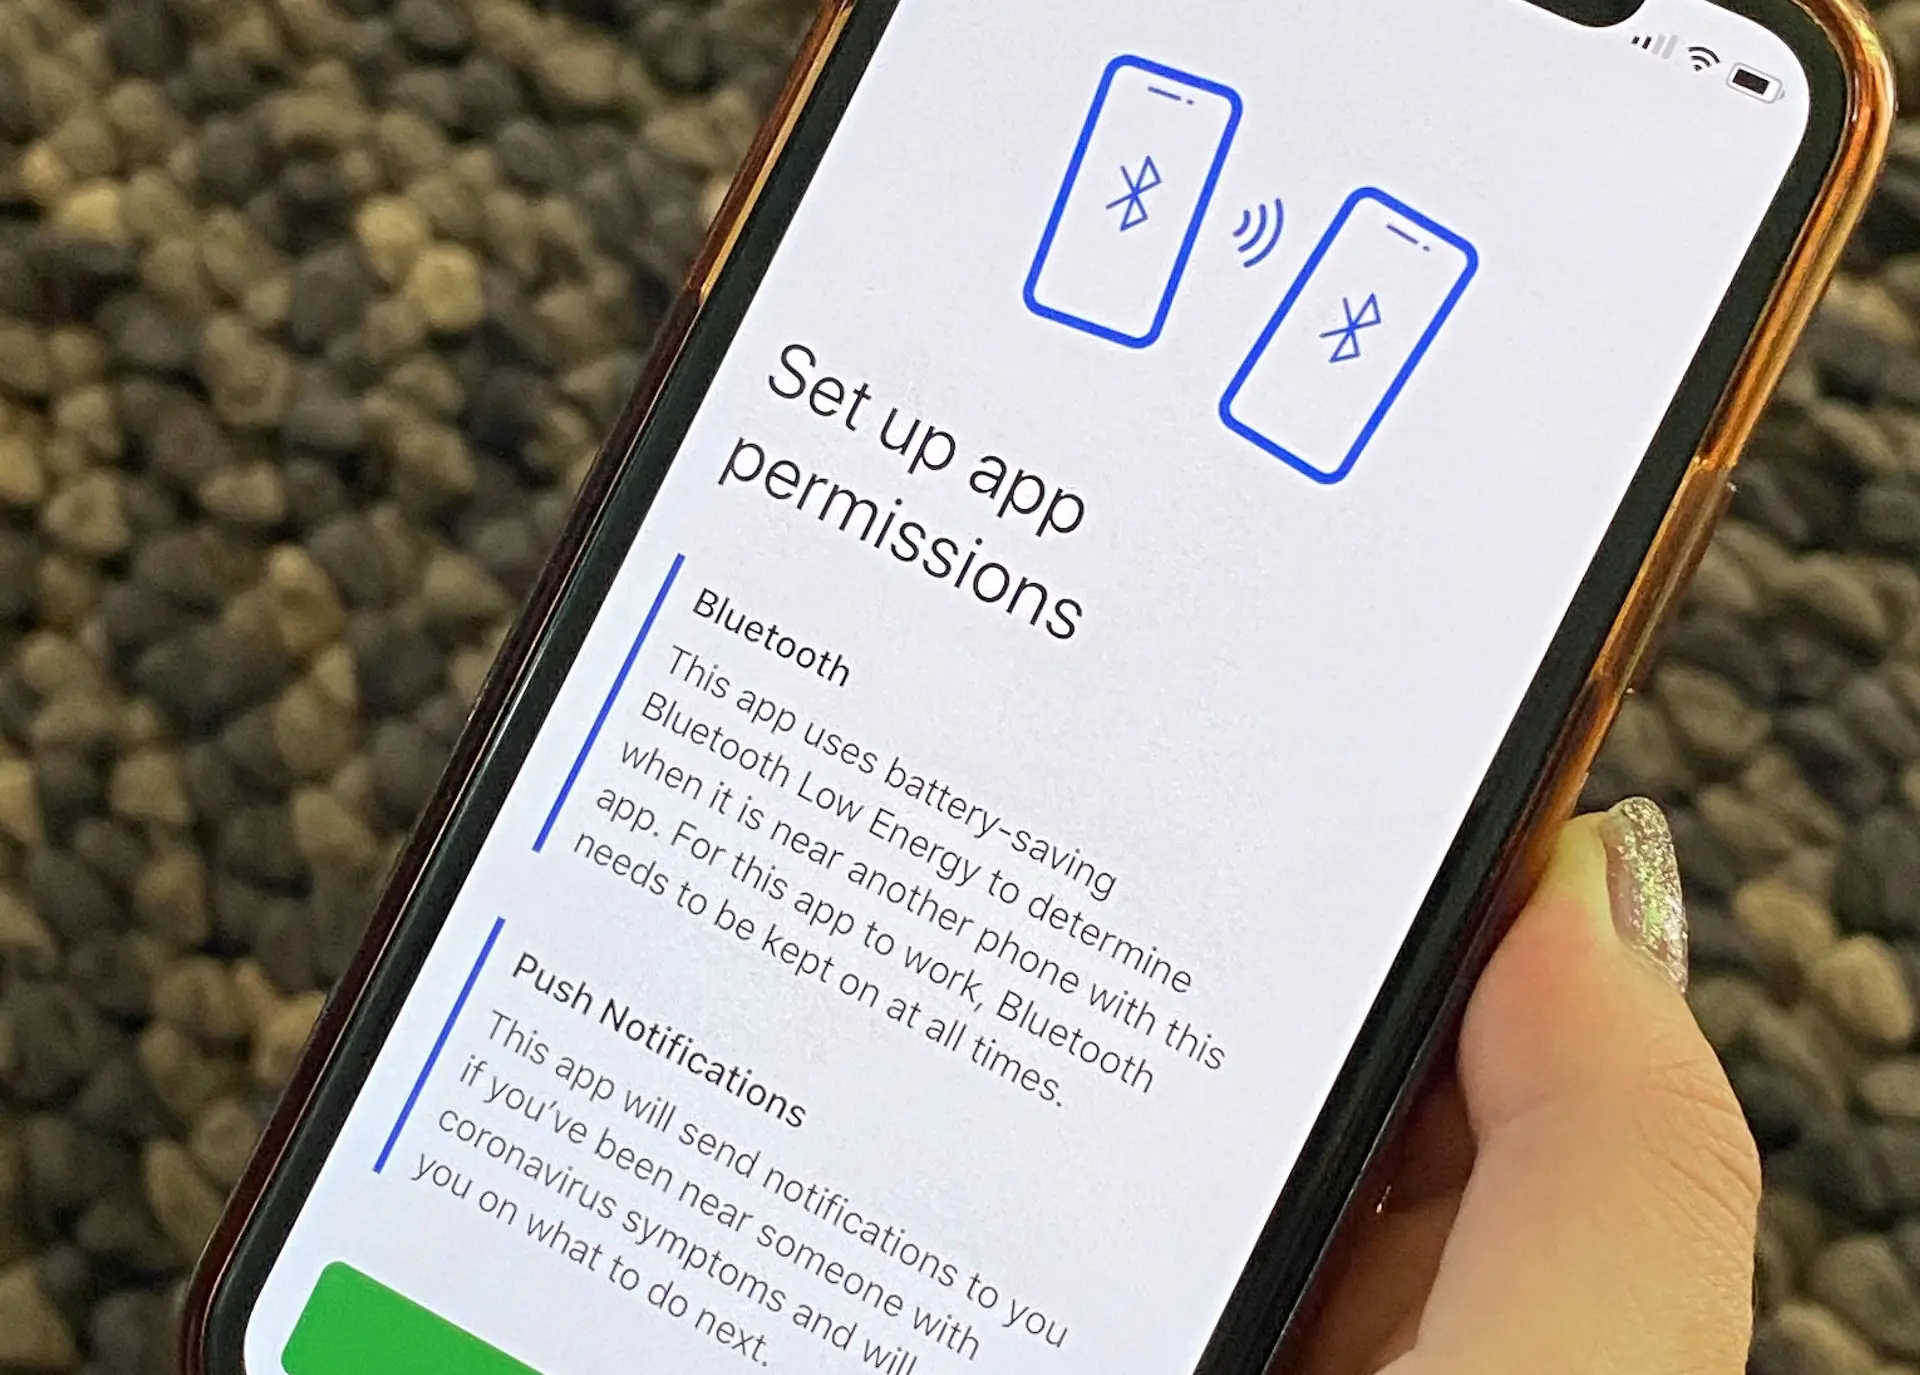 set up permissions screen on contact tracing app